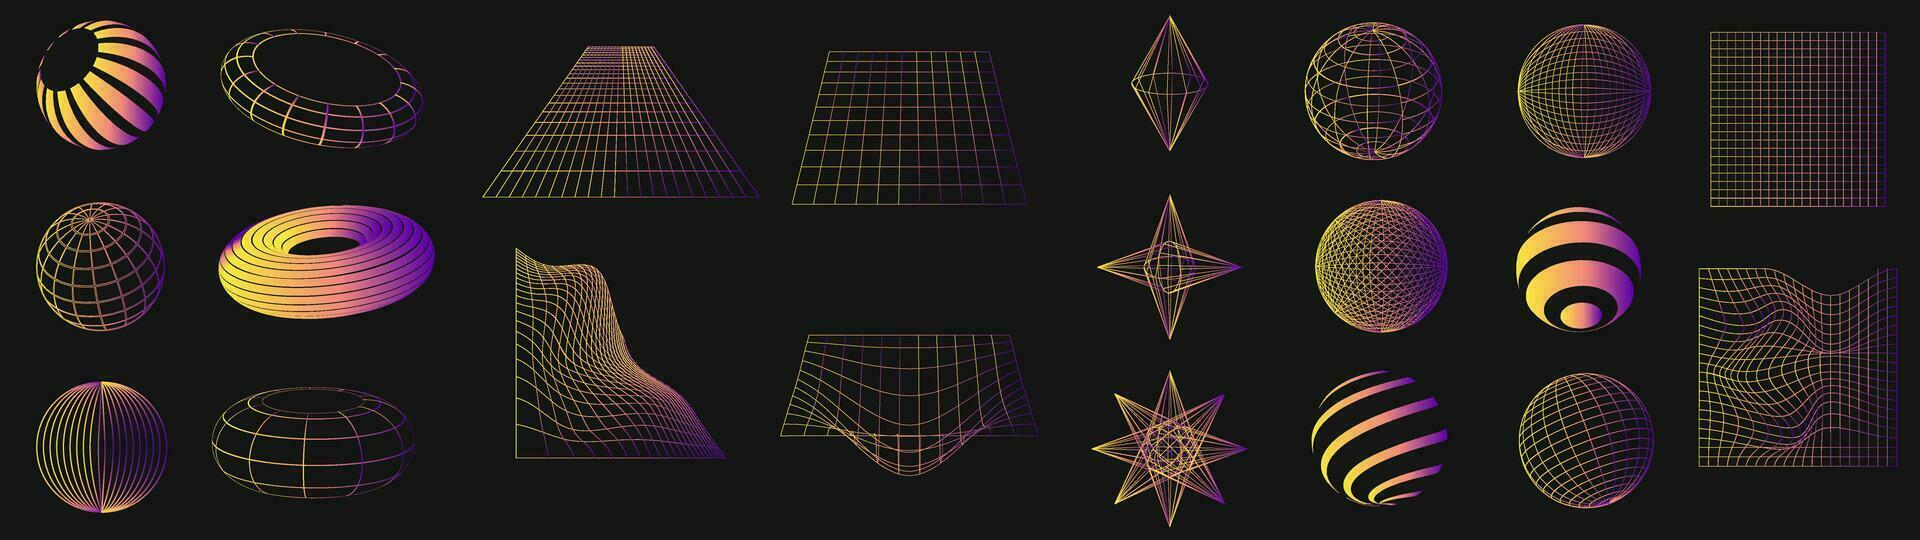 Big set of wireframe shapes. Cyber neo futuristic grids, 3d mesh objects and shapes. Wireframe wavy geometric perspective ball, sphere, rhombus, oval, grid, . 80s cyberpunk elements, vector set.